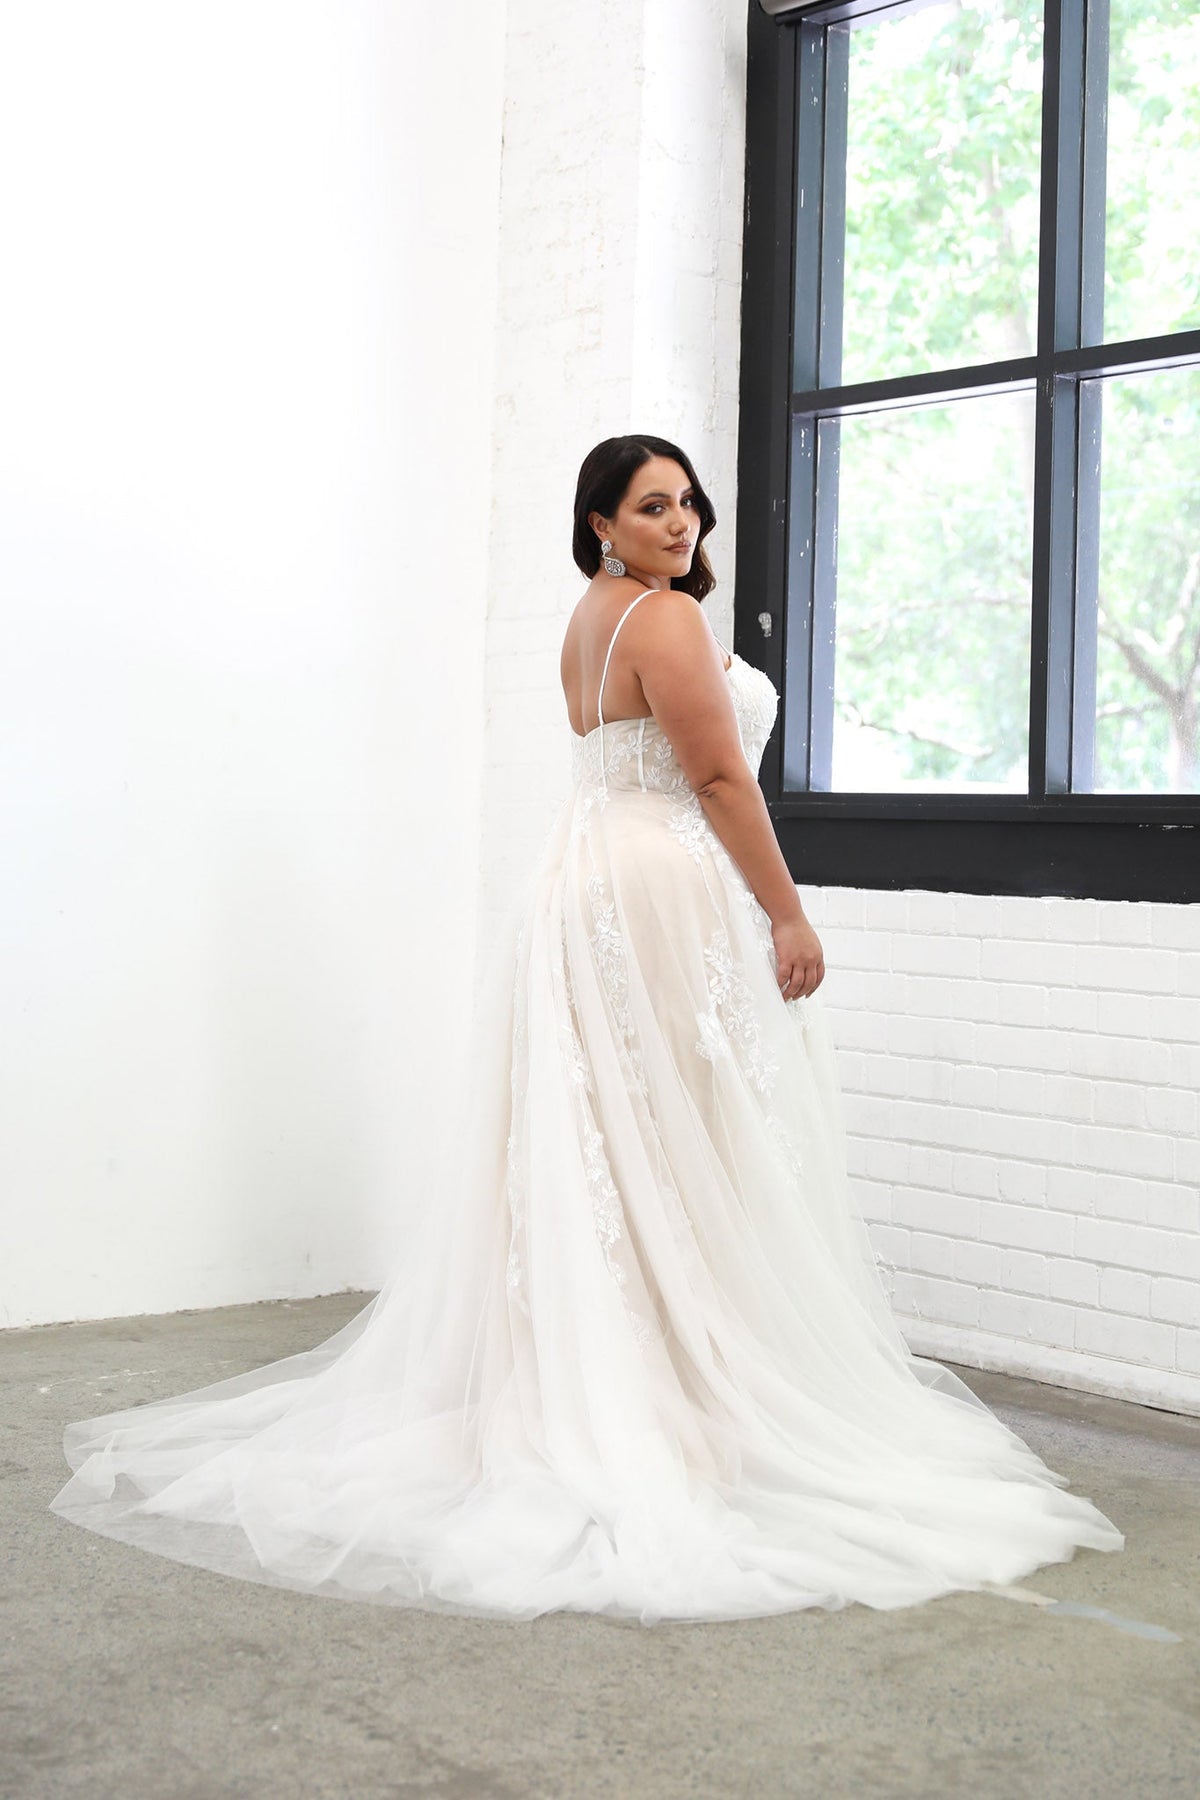 Plus Size Bride in Ivory Off White Lace A-line Wedding Gown with Floral and Vine-like Lace Motifs Embellished on Layered Tulle, Trendy Exposed Bone Bodice, Voluminous Full A-line Skirt and Flowing Sweep Train